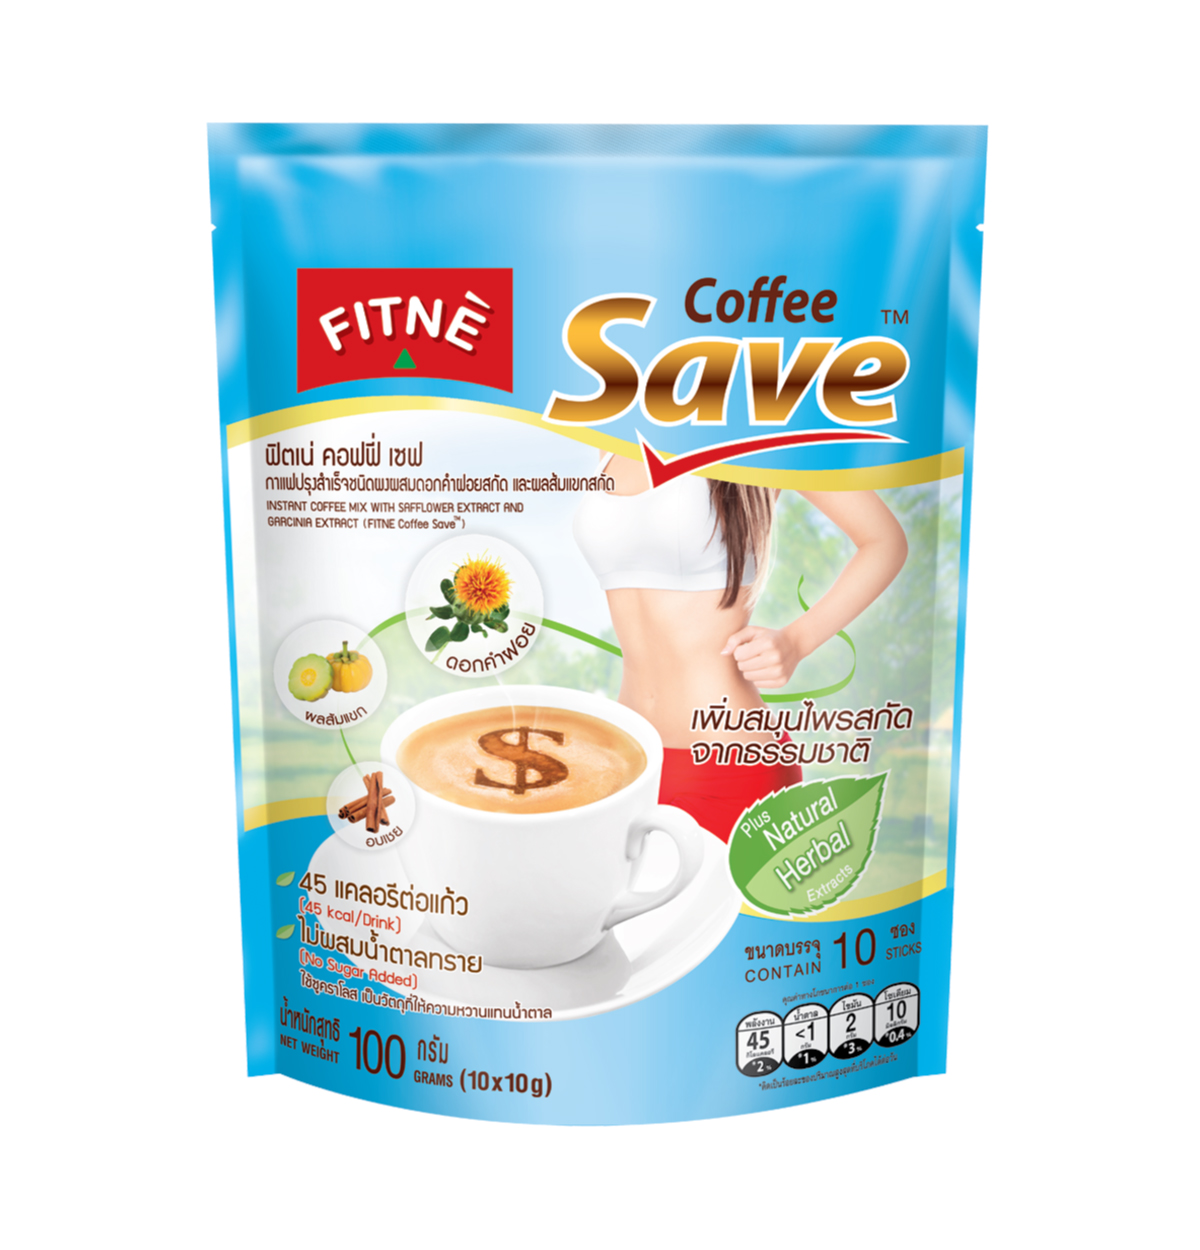 FITNE' Coffee Save Instant Coffee Mix with Safflower Extract and Garcinia Extract 10g.x10 Sticks